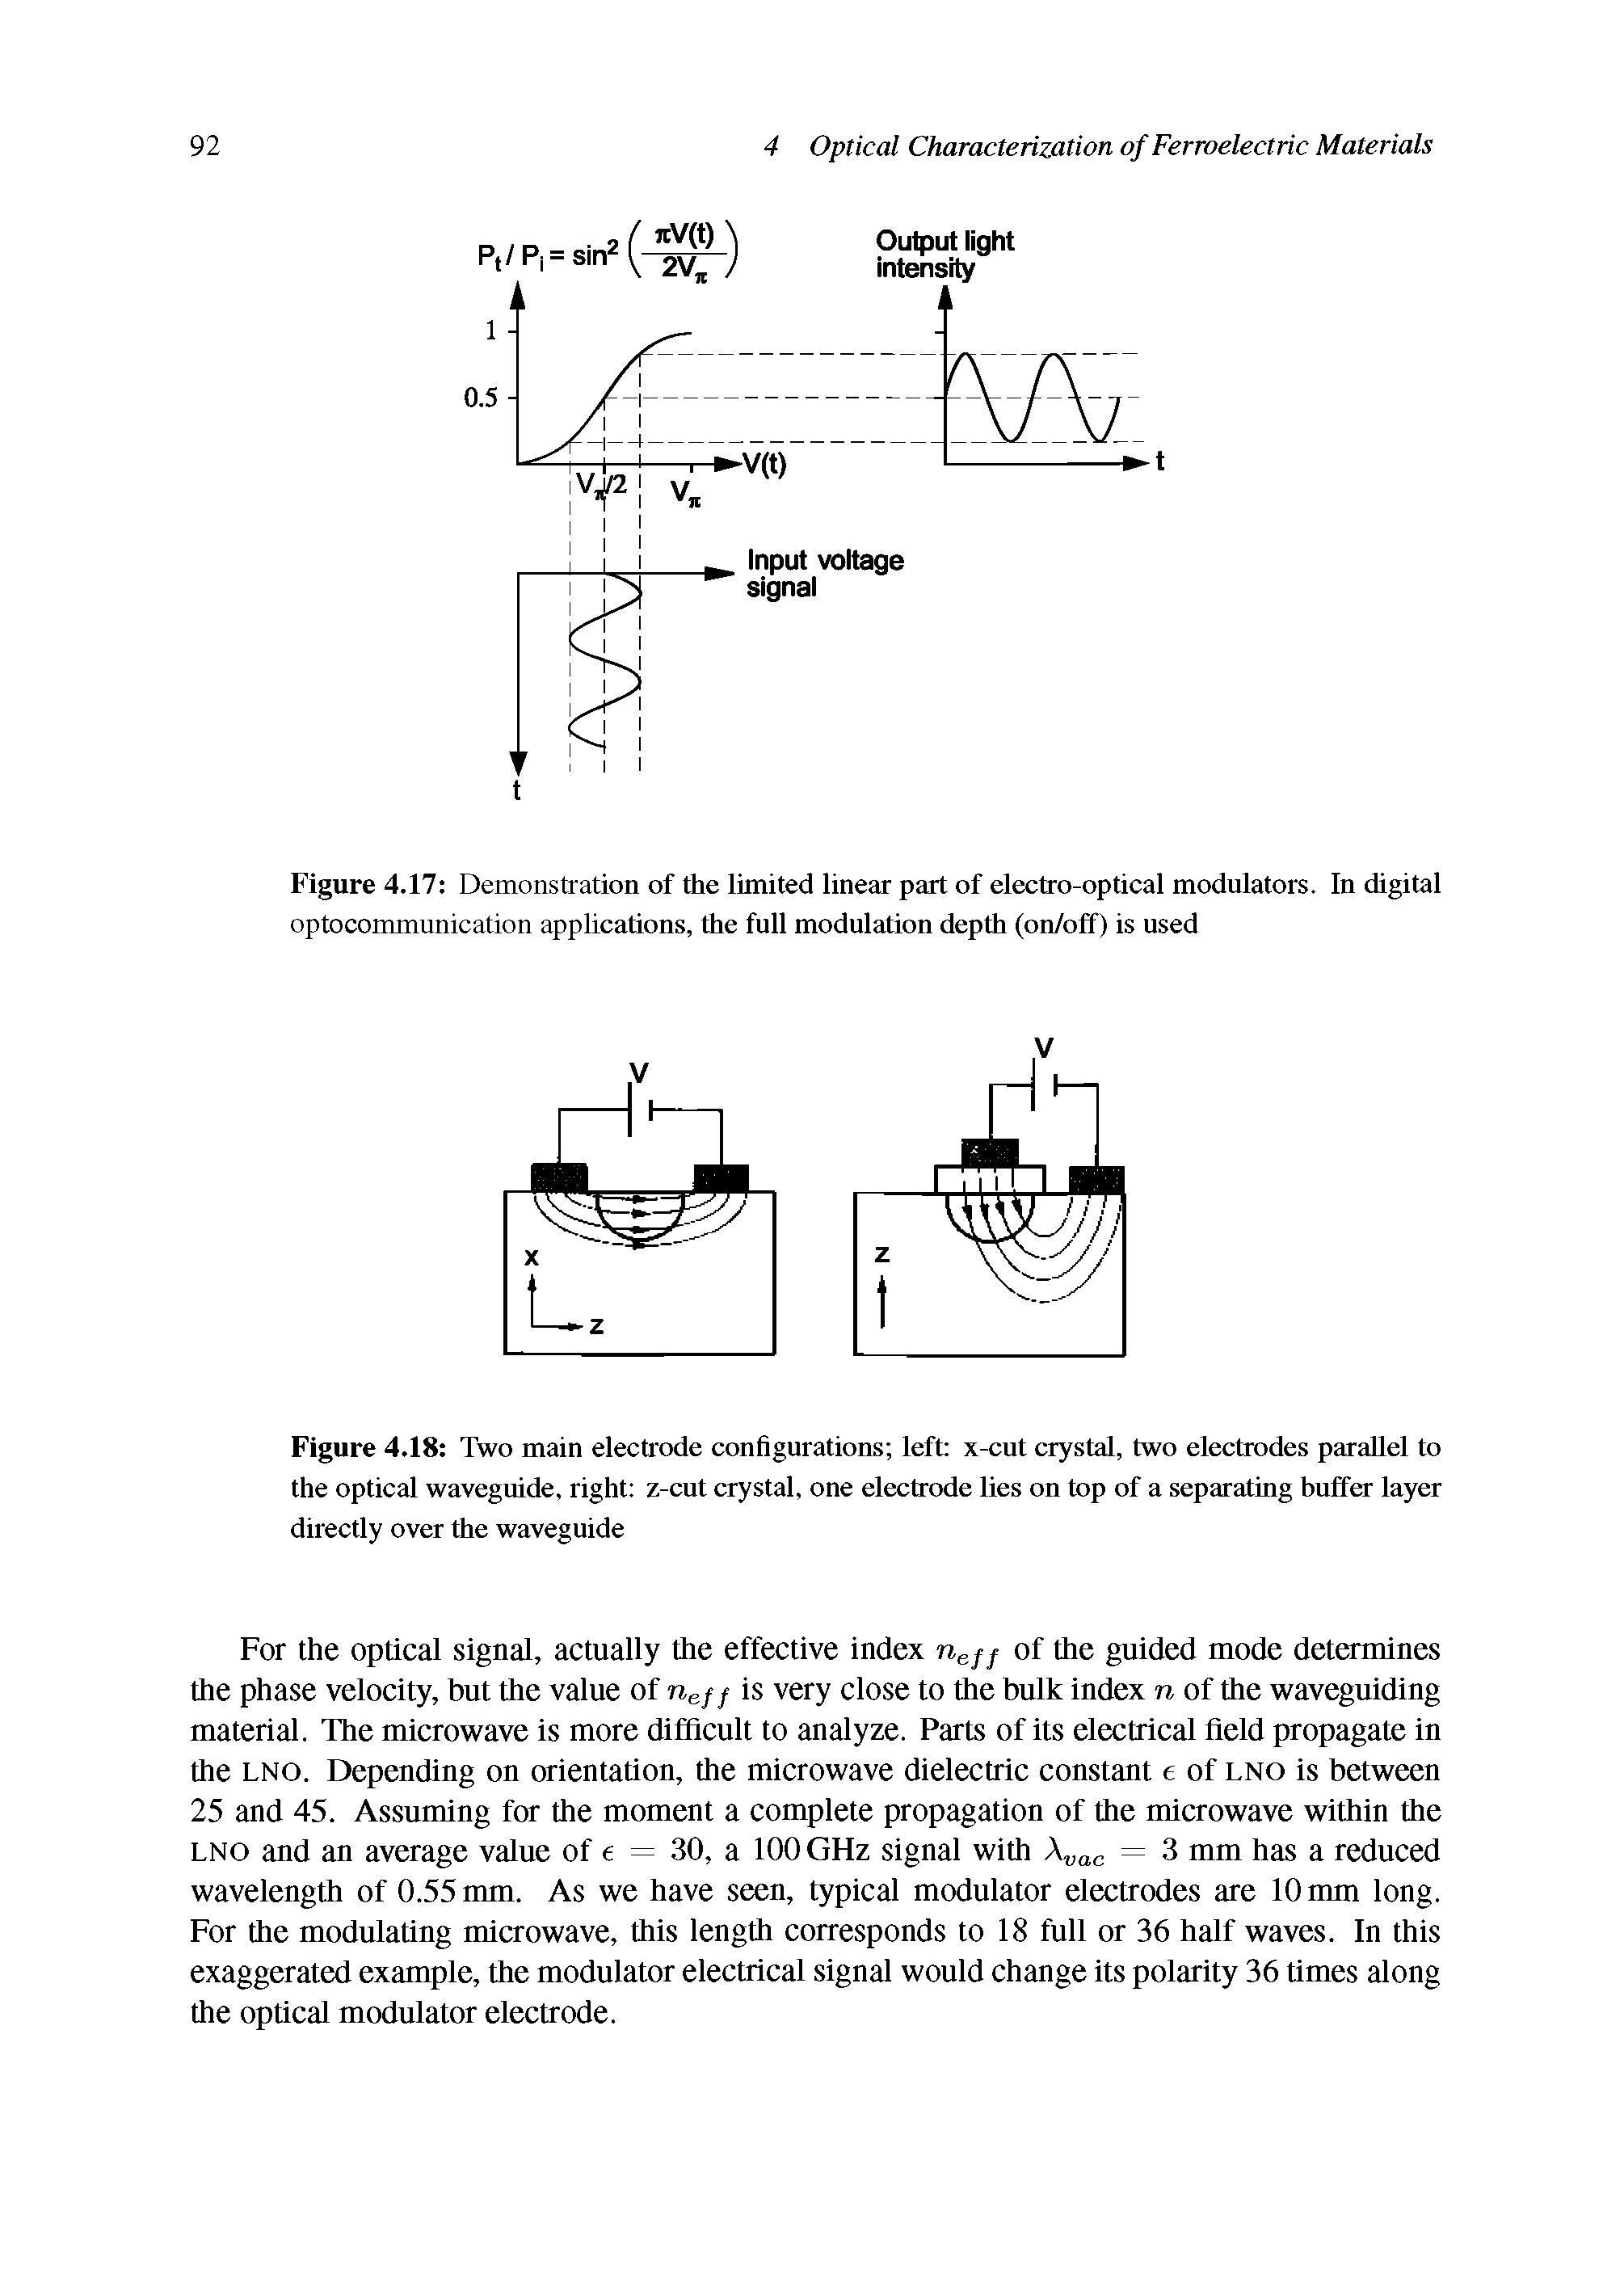 Figure 4.17 Demonstration of the limited linear part of electro-optical modulators. In digital optocommunication applications, the full modulation depth (on/off) is used...